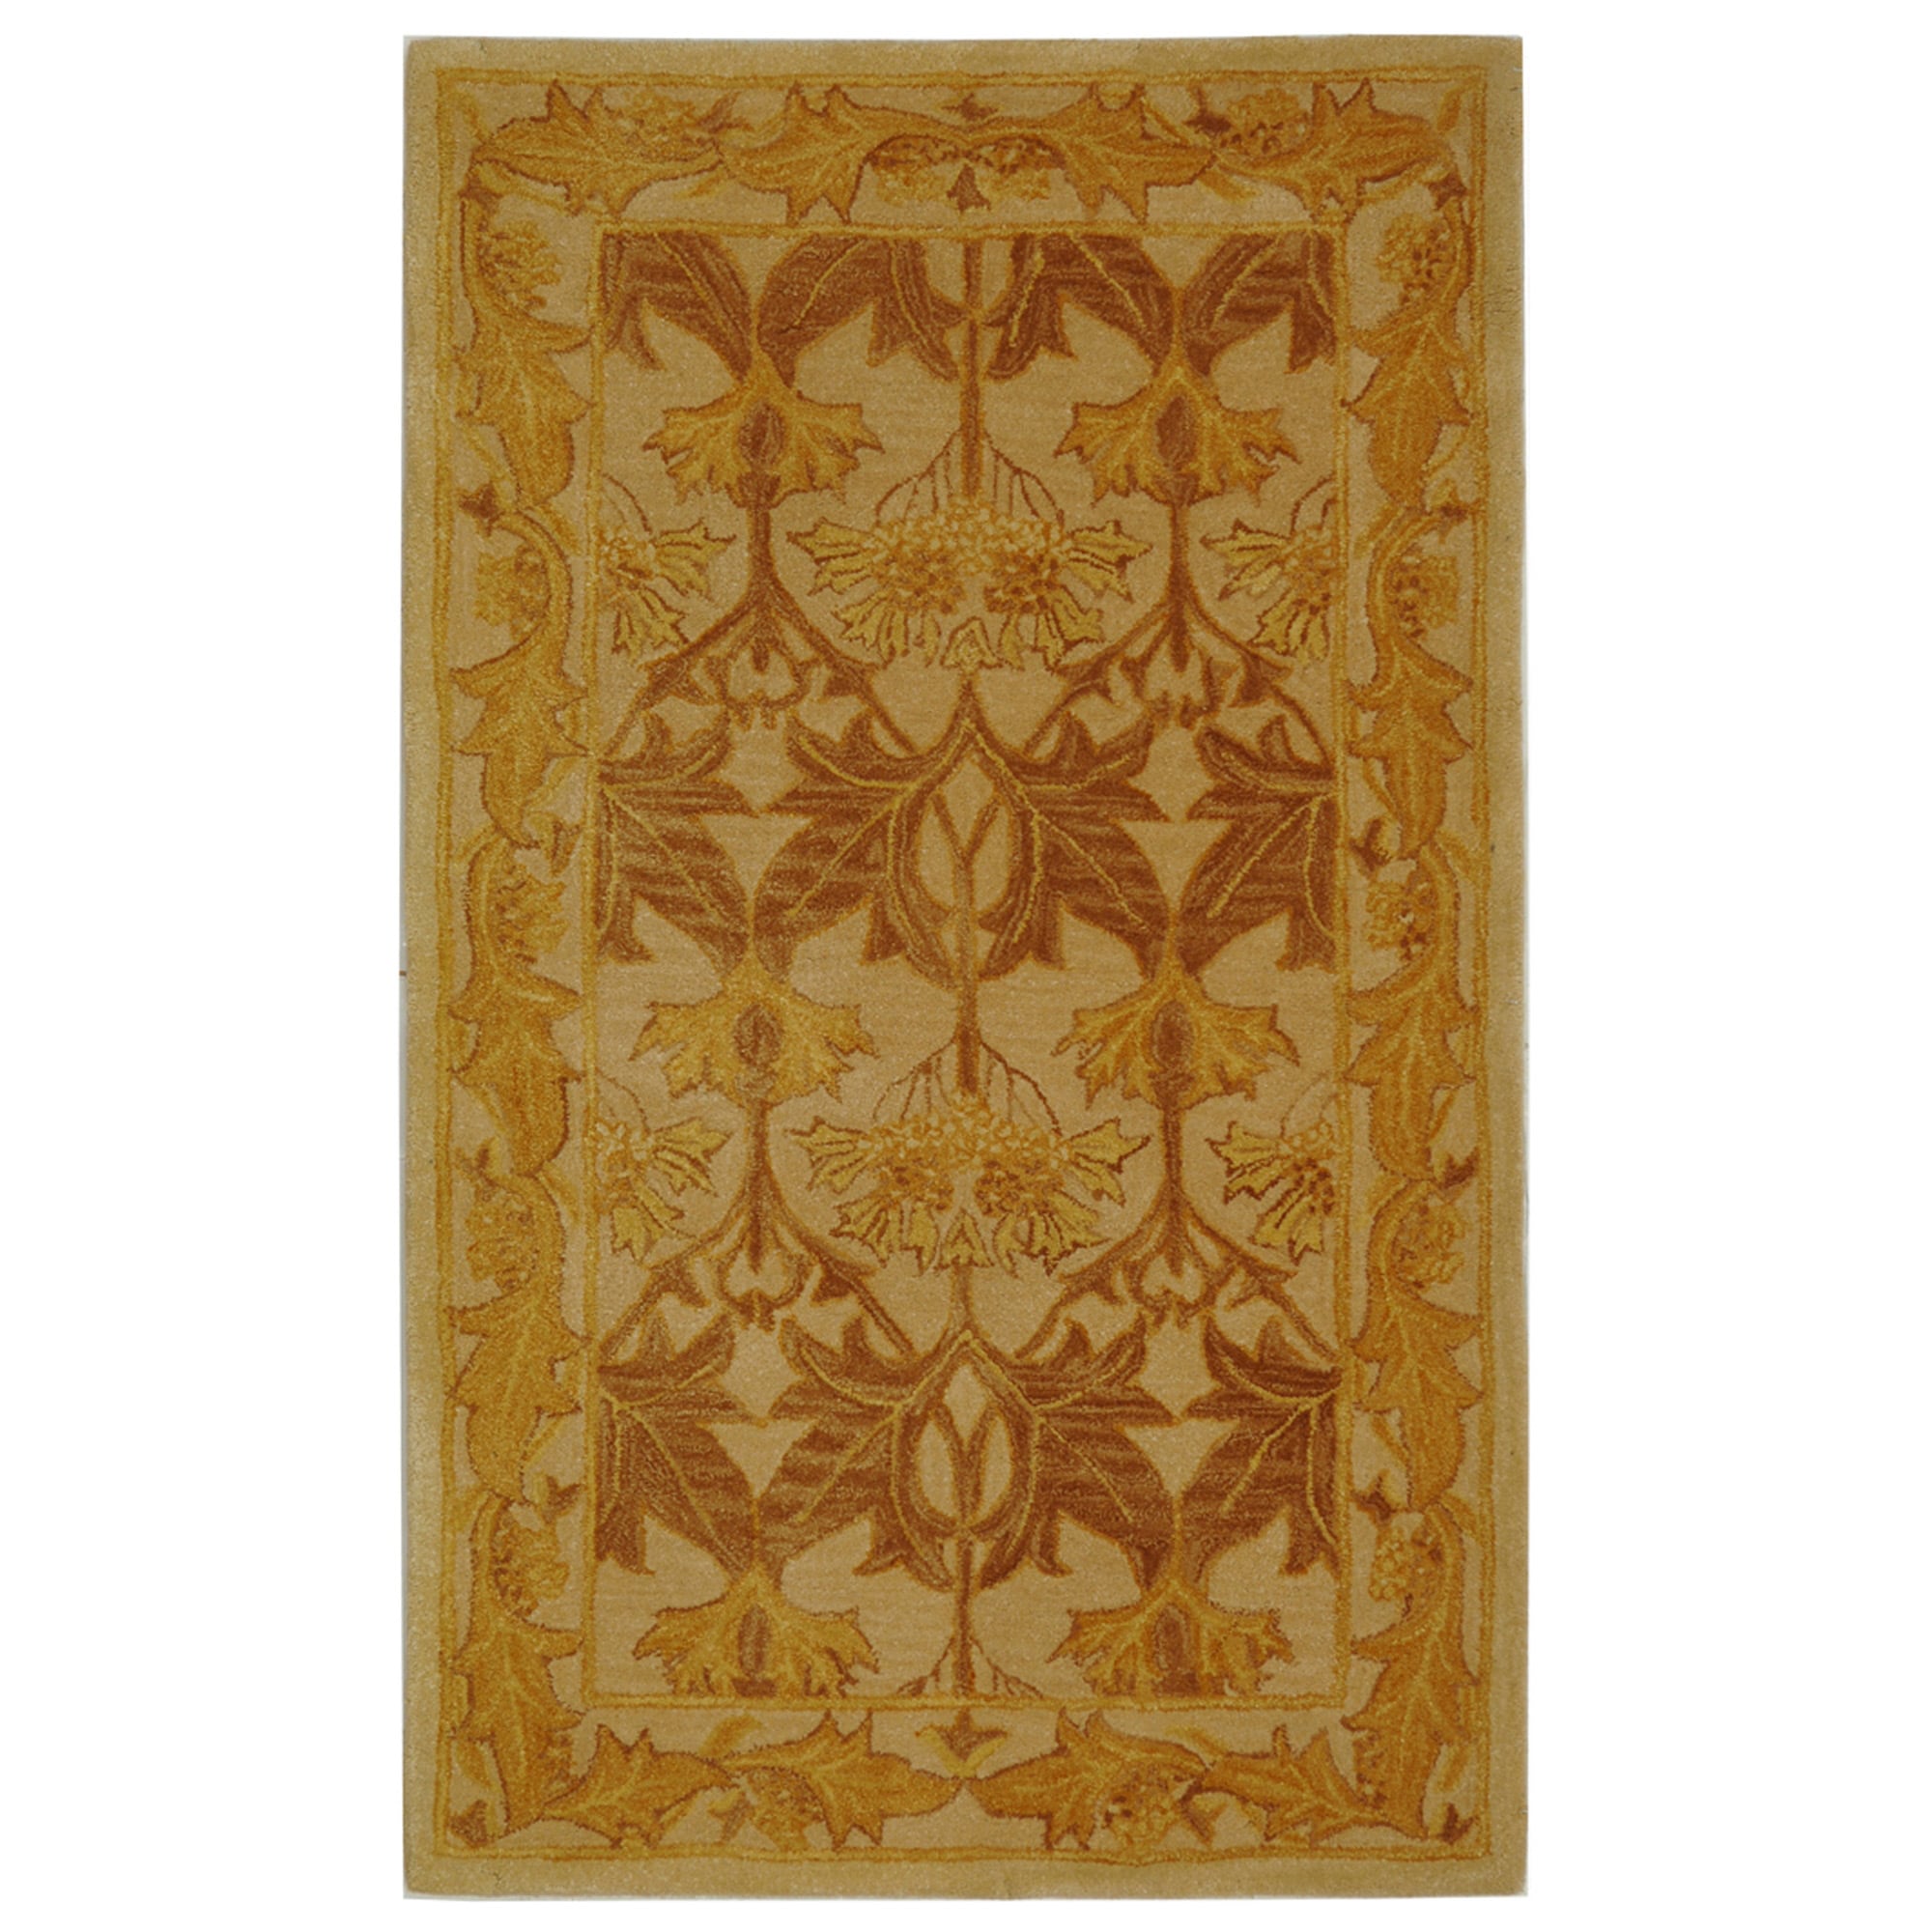 Handmade Nomadic Ivory/ Gold Wool Rug (3 X 5) (IvoryPattern OrientalMeasures 0.625 inch thickTip We recommend the use of a non skid pad to keep the rug in place on smooth surfaces.All rug sizes are approximate. Due to the difference of monitor colors, s